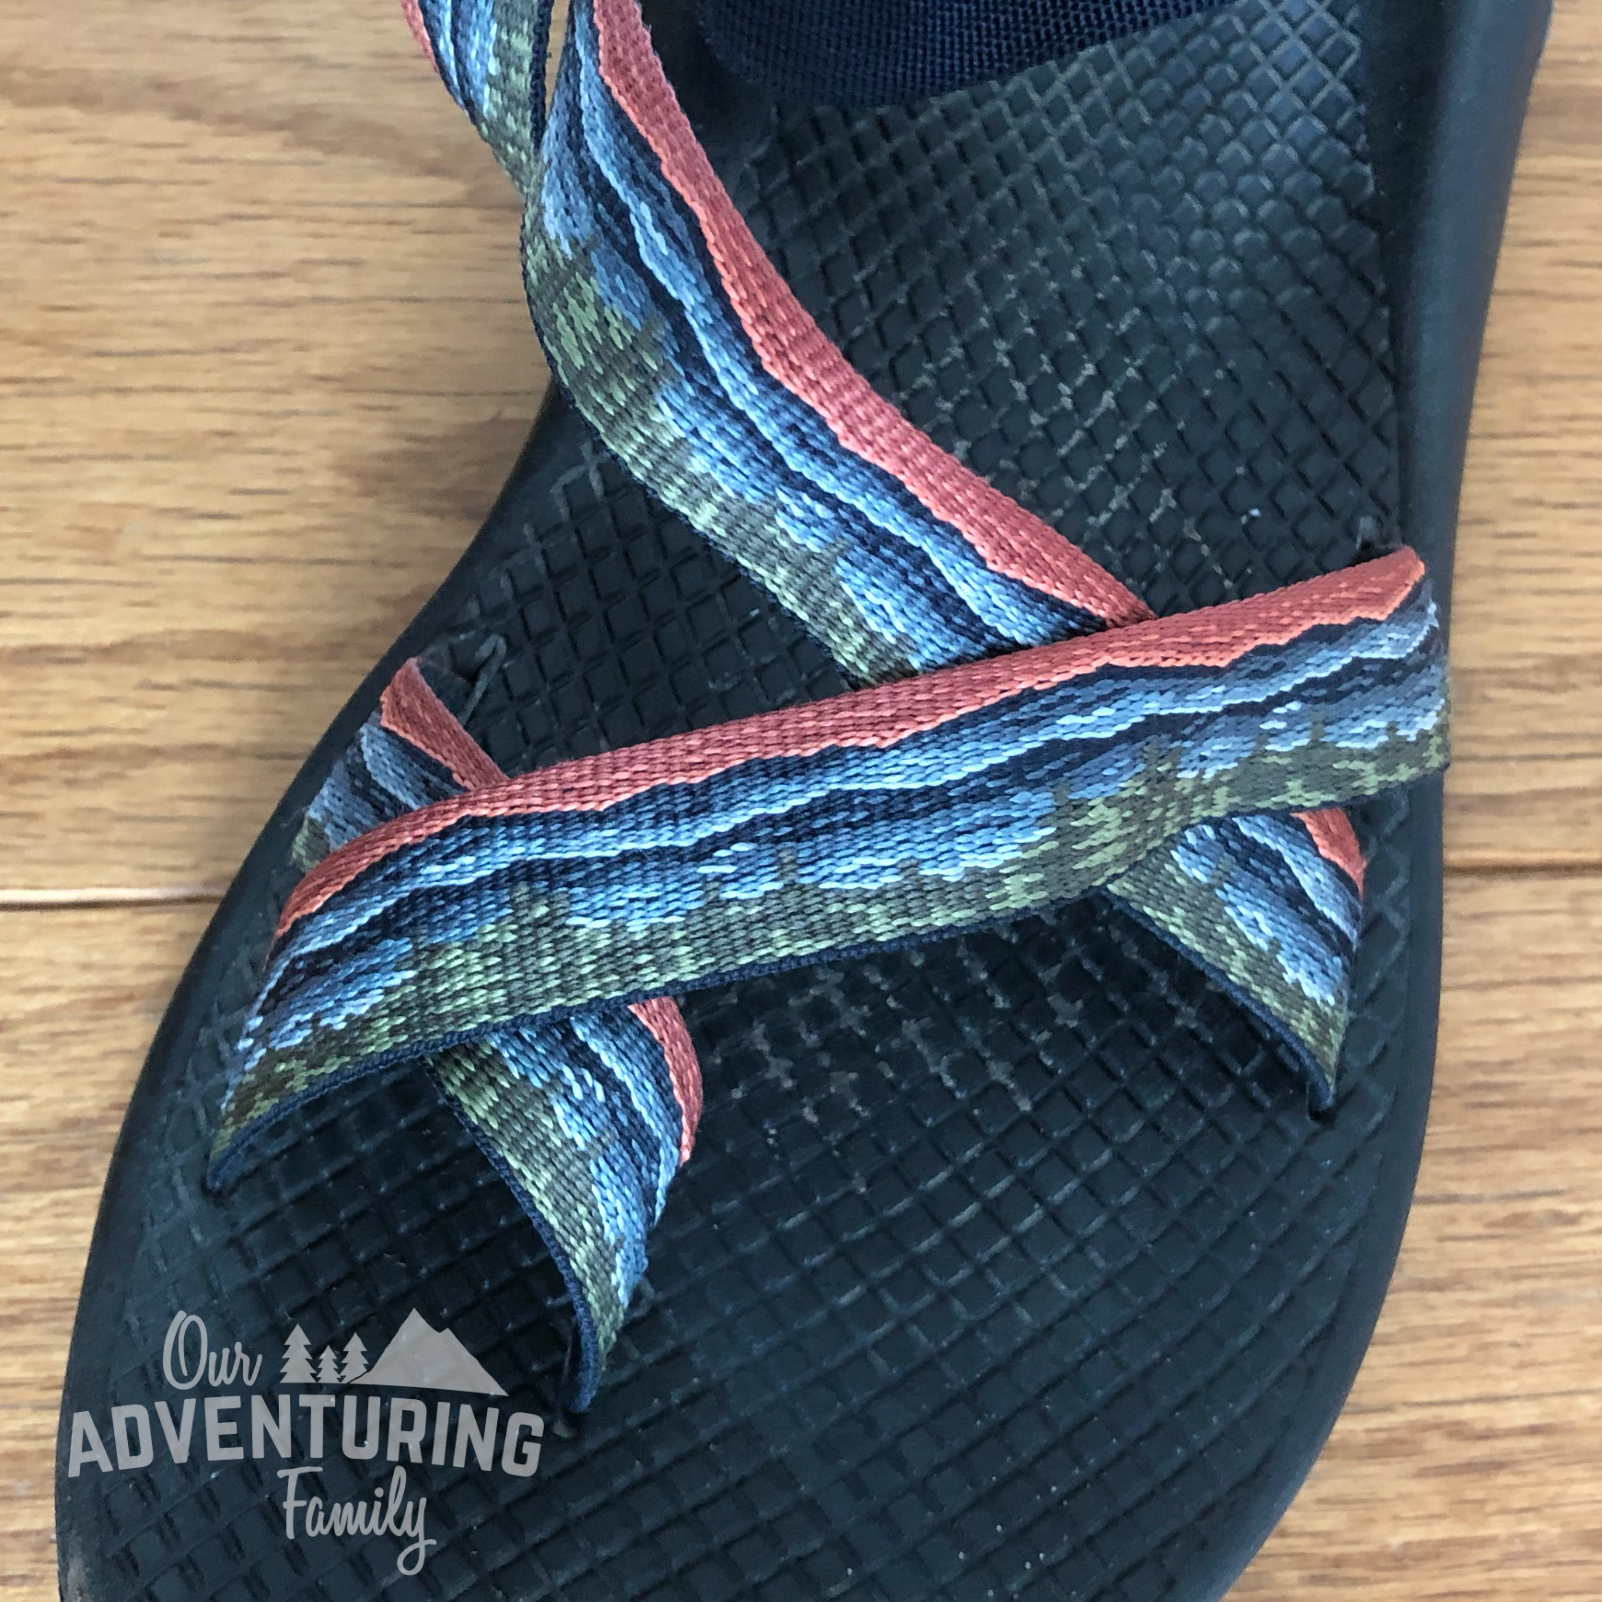 Keens vs Chacos: which should you buy? They both have advantages and disadvantages, and here’s my experiences with both and what I’m currently wearing. Find out more at ouradventuringfamily.com. 